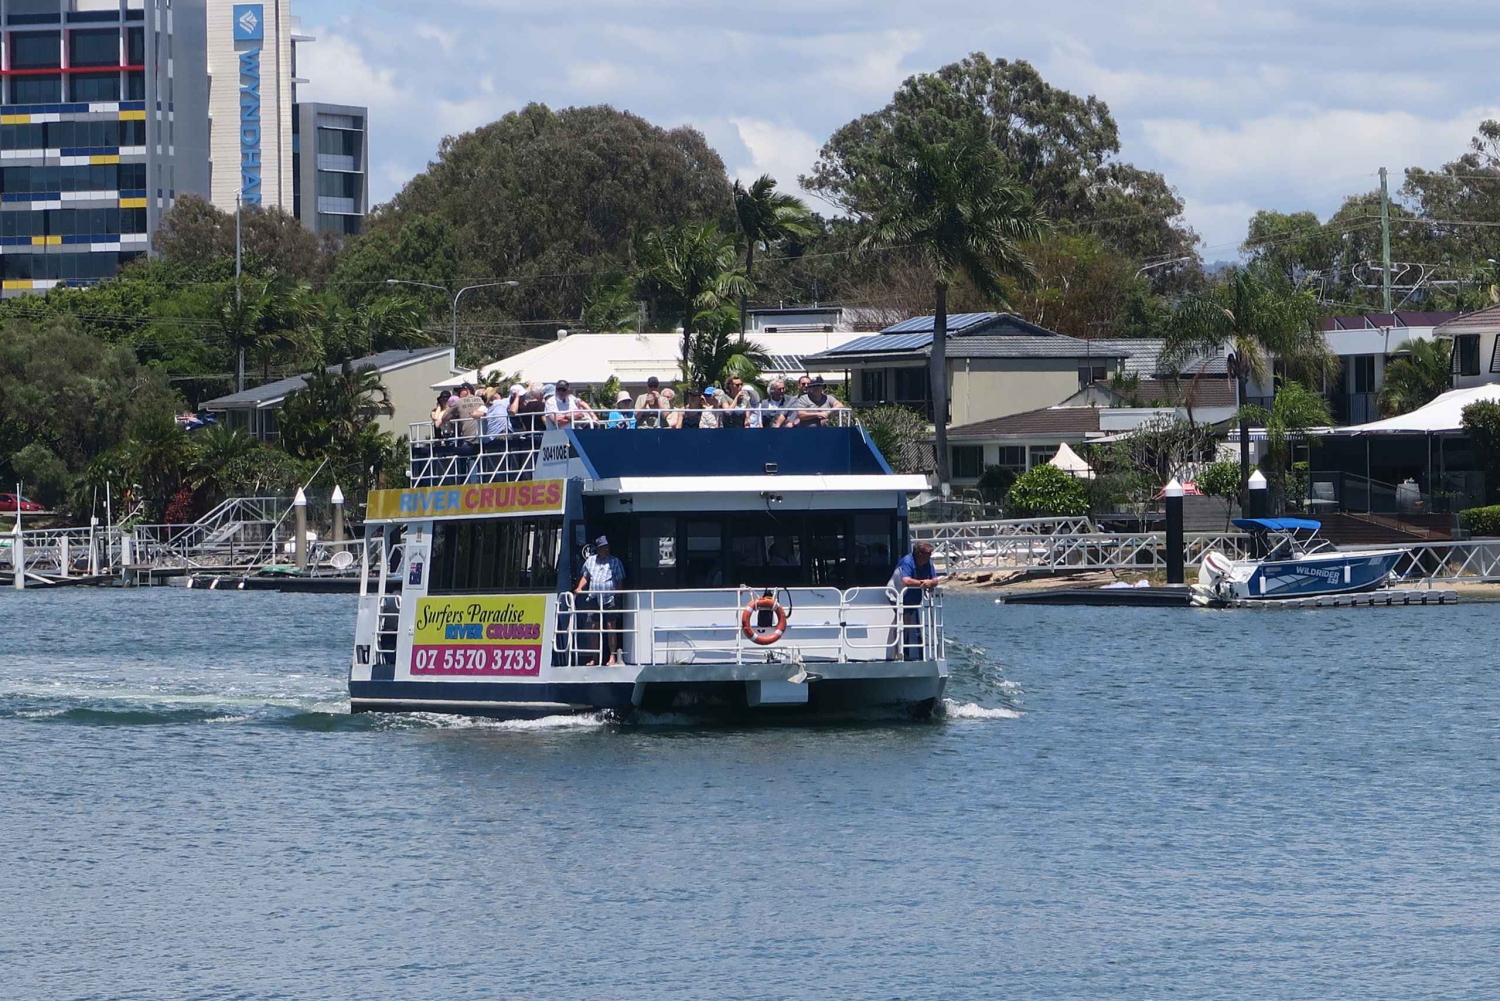 Gold Coast Morning Tea Cruise from Surfers Paradise